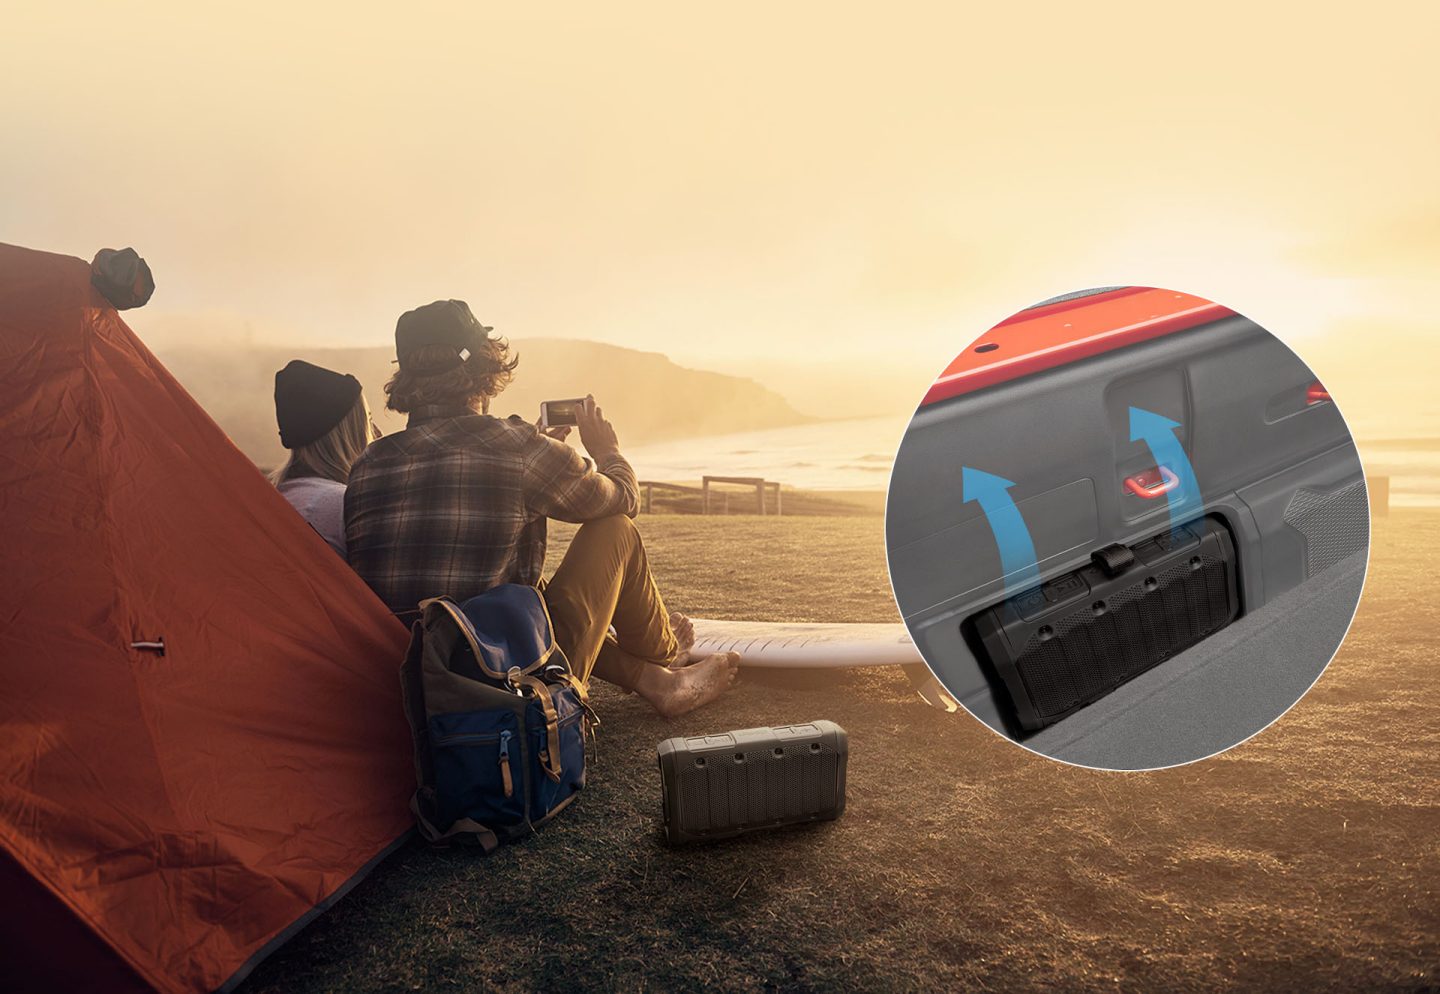 A couple camping on the beach with the man holding a smartphone with an available Bluetooth speaker on the ground beside him. Inset image of the Bluetooth speaker in its charging port in the 2023 Jeep Gladiator.